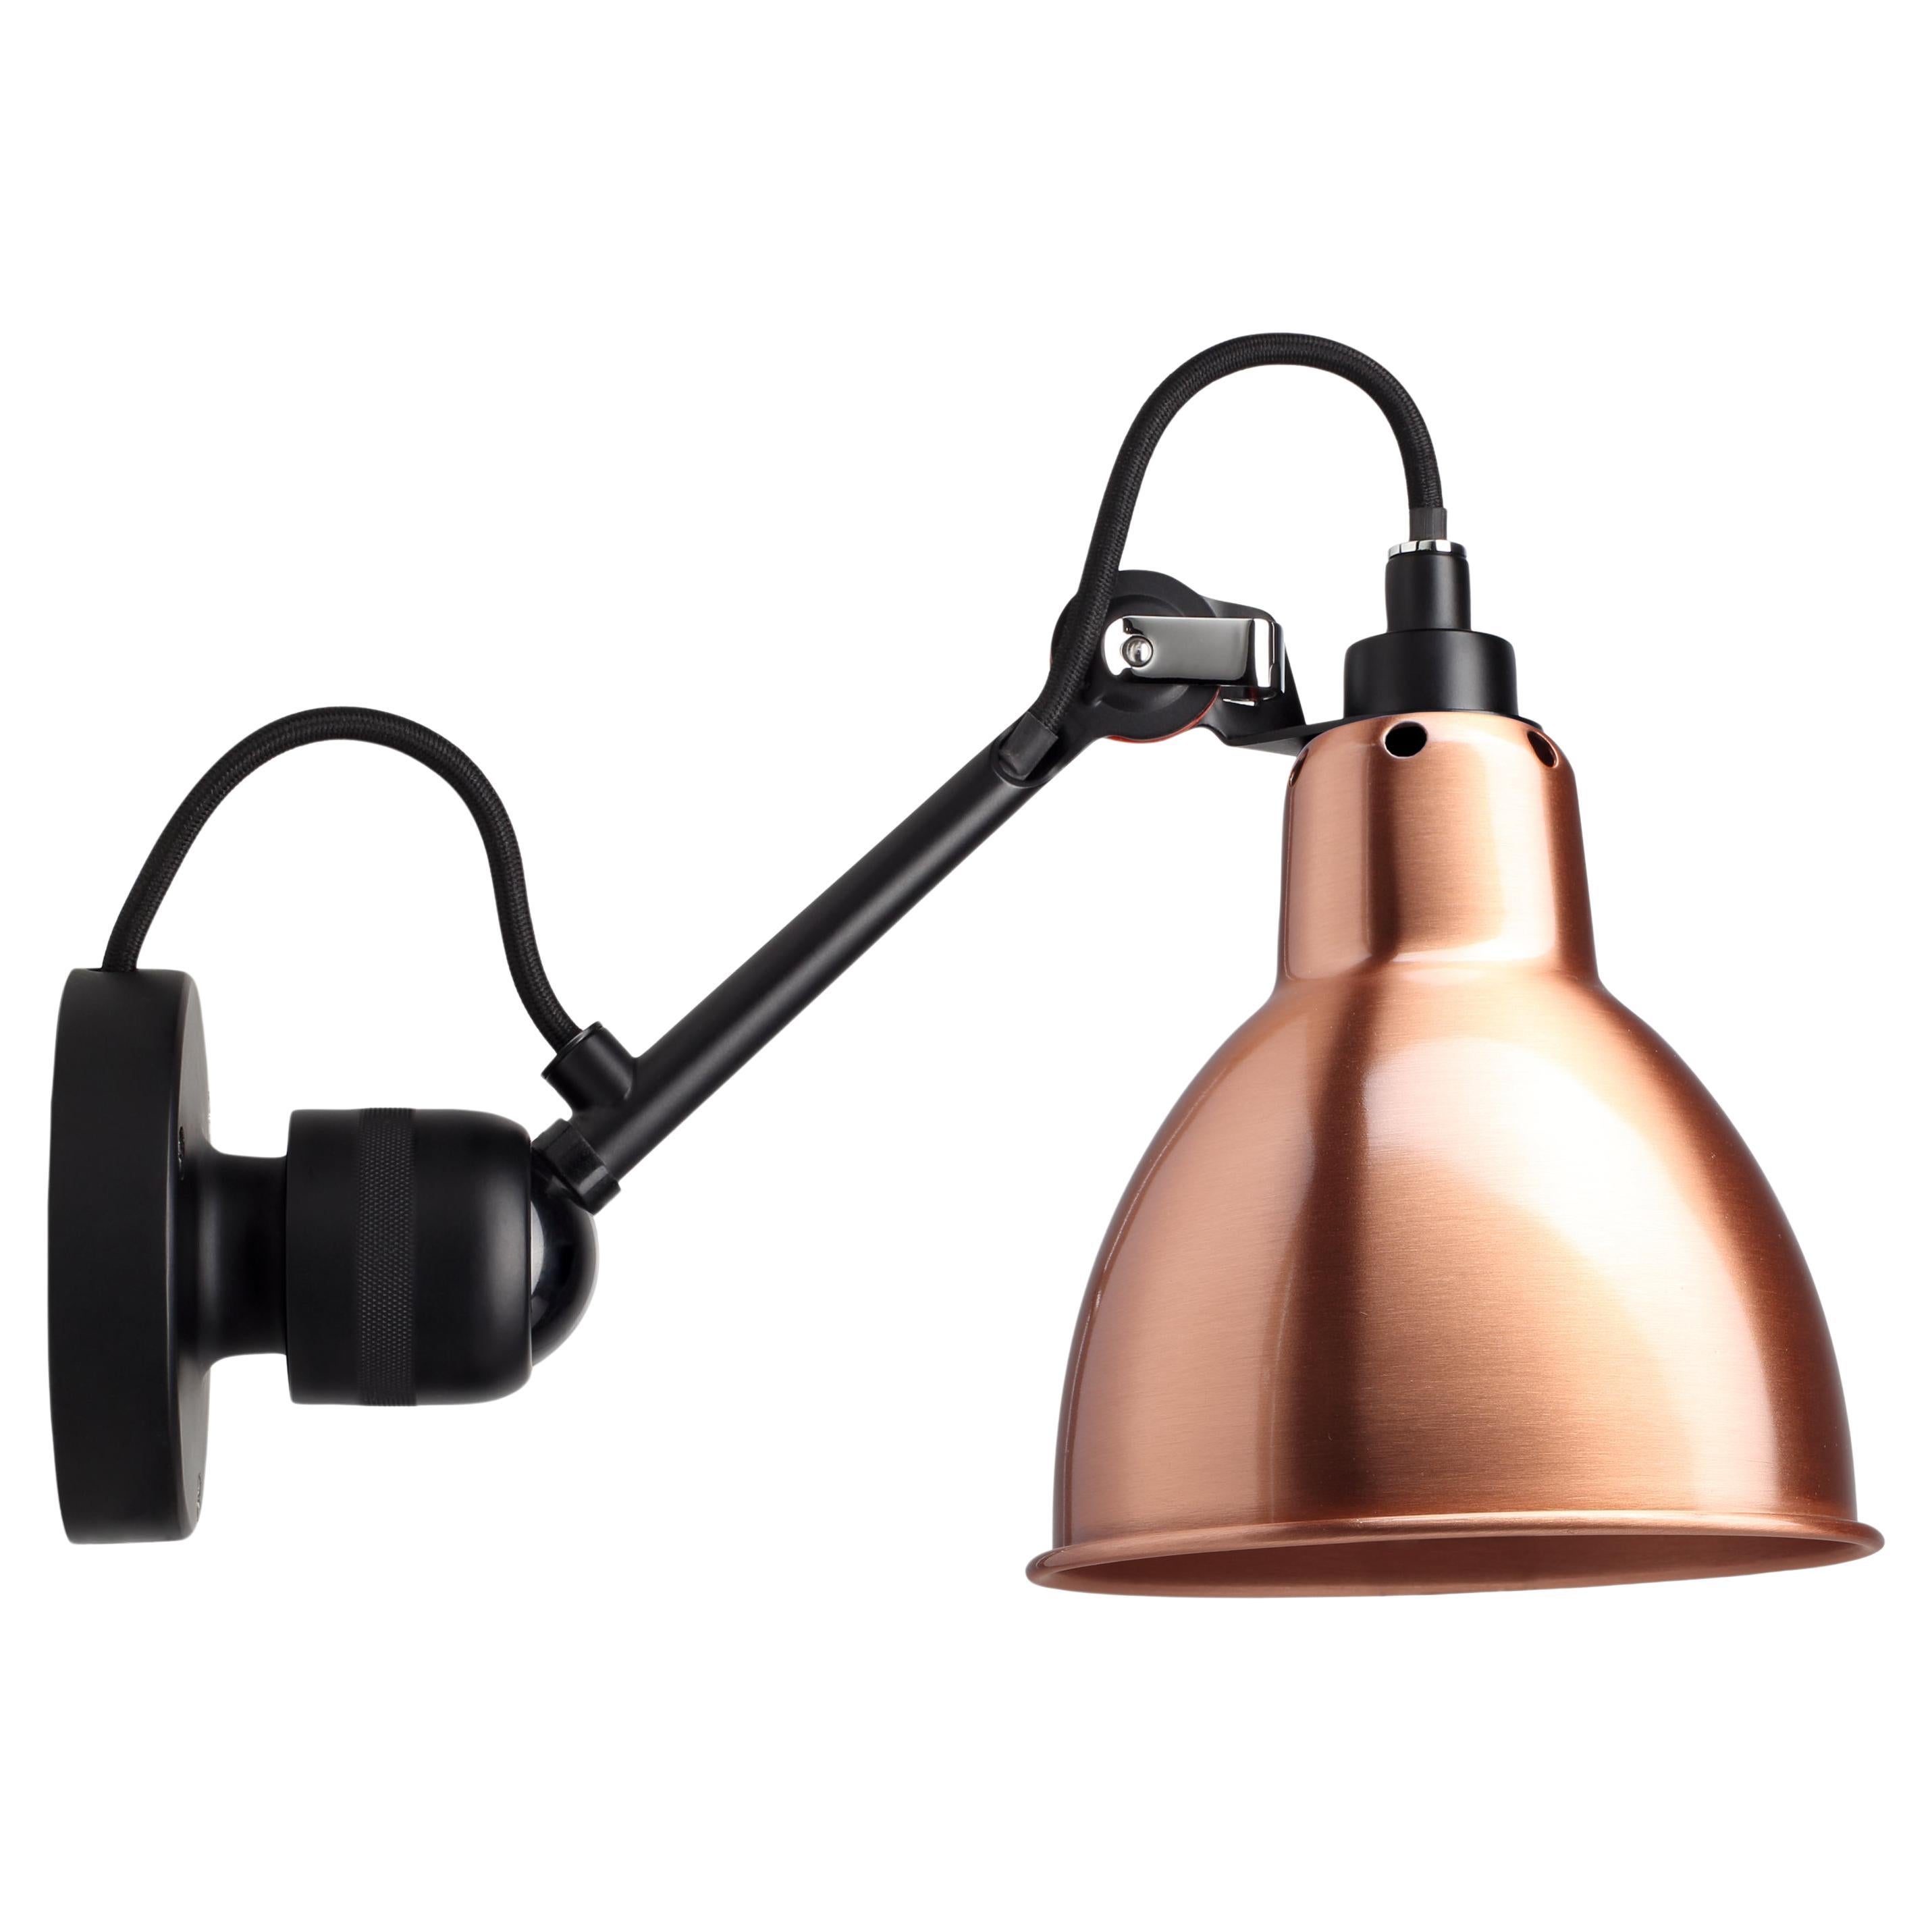 DCW Editions La Lampe Gras N°304 Wall Lamp in Black Arm and Copper Shade For Sale